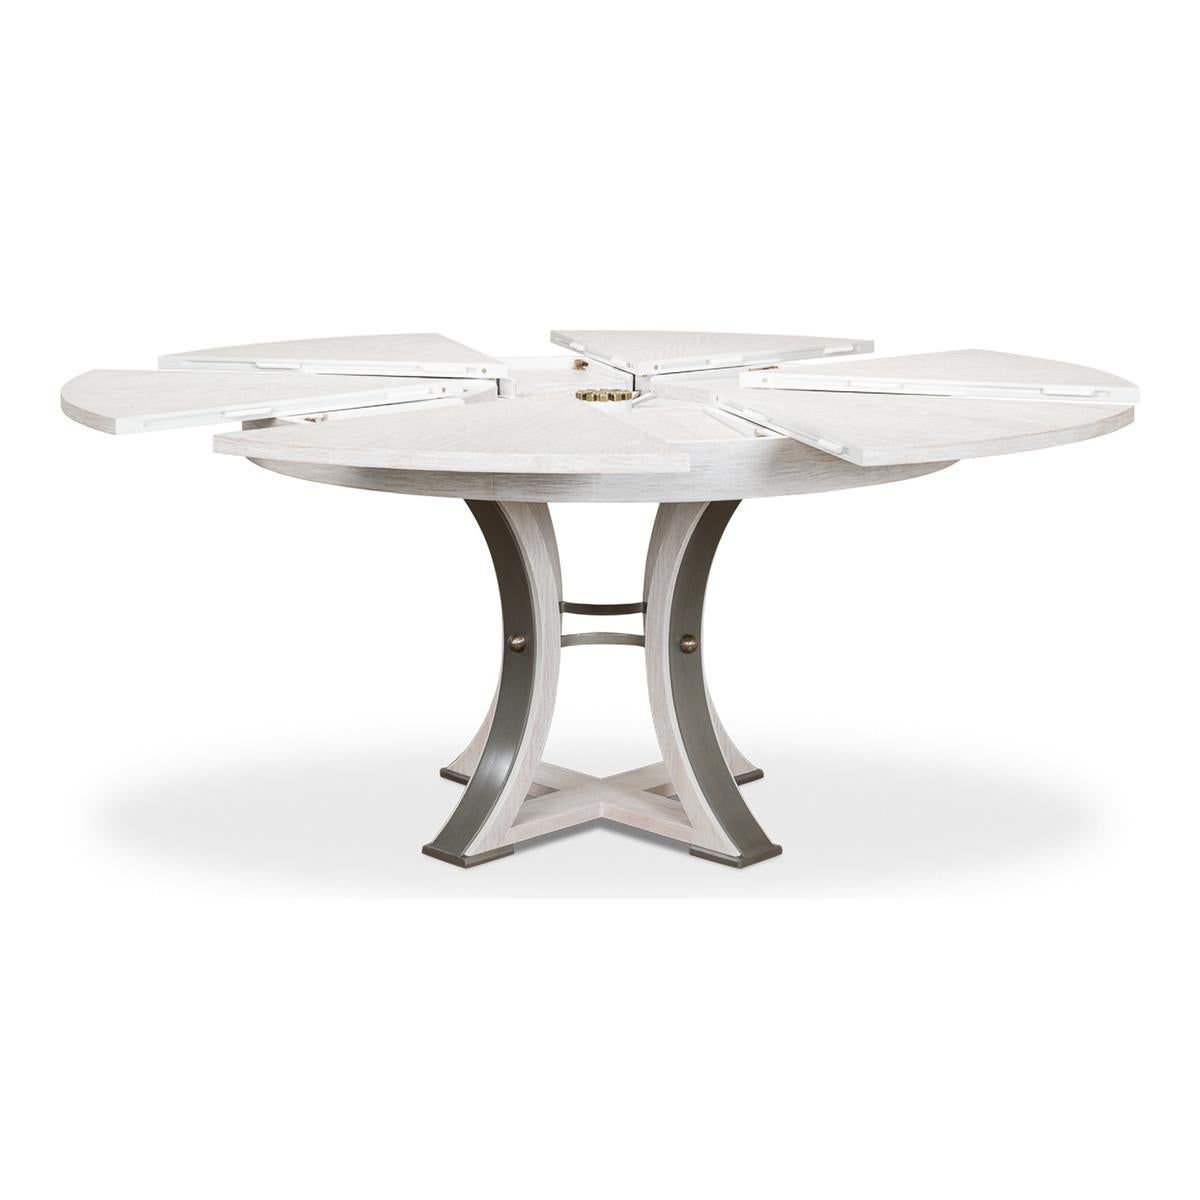 Vietnamese Modern Industrial Dining Table - 70 - White For Sale